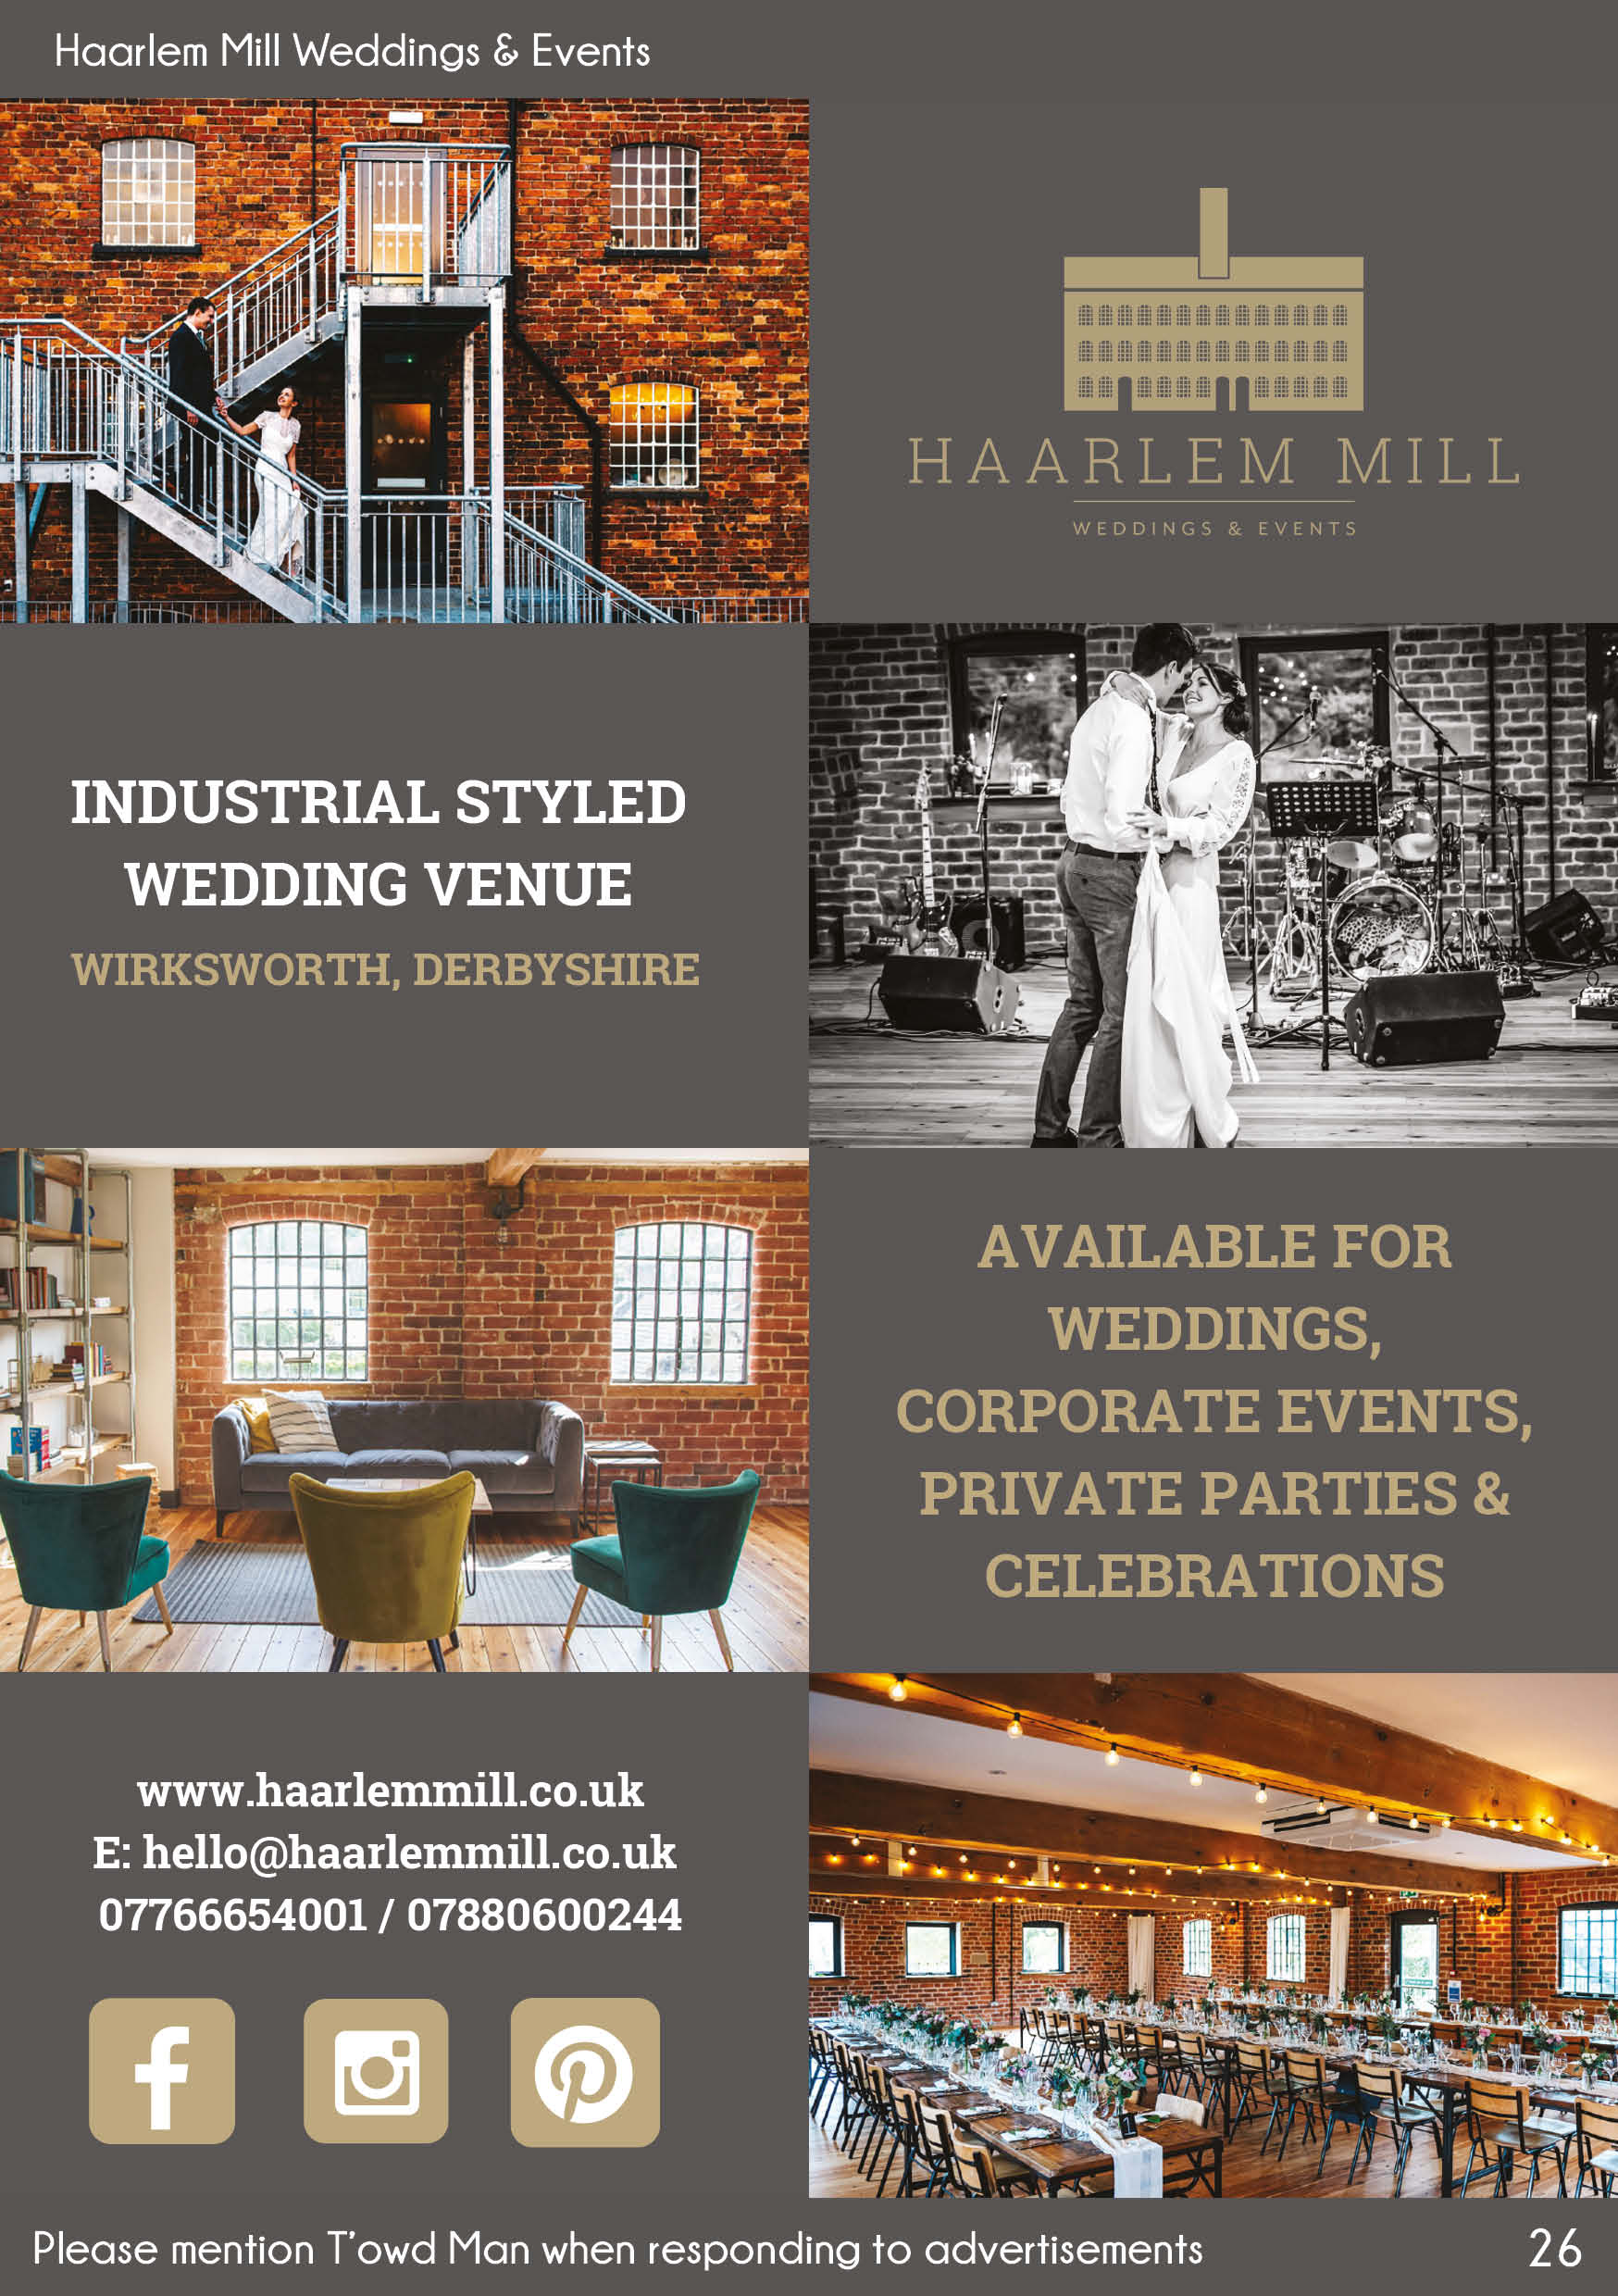 Haarlem Mill Weddings and Events